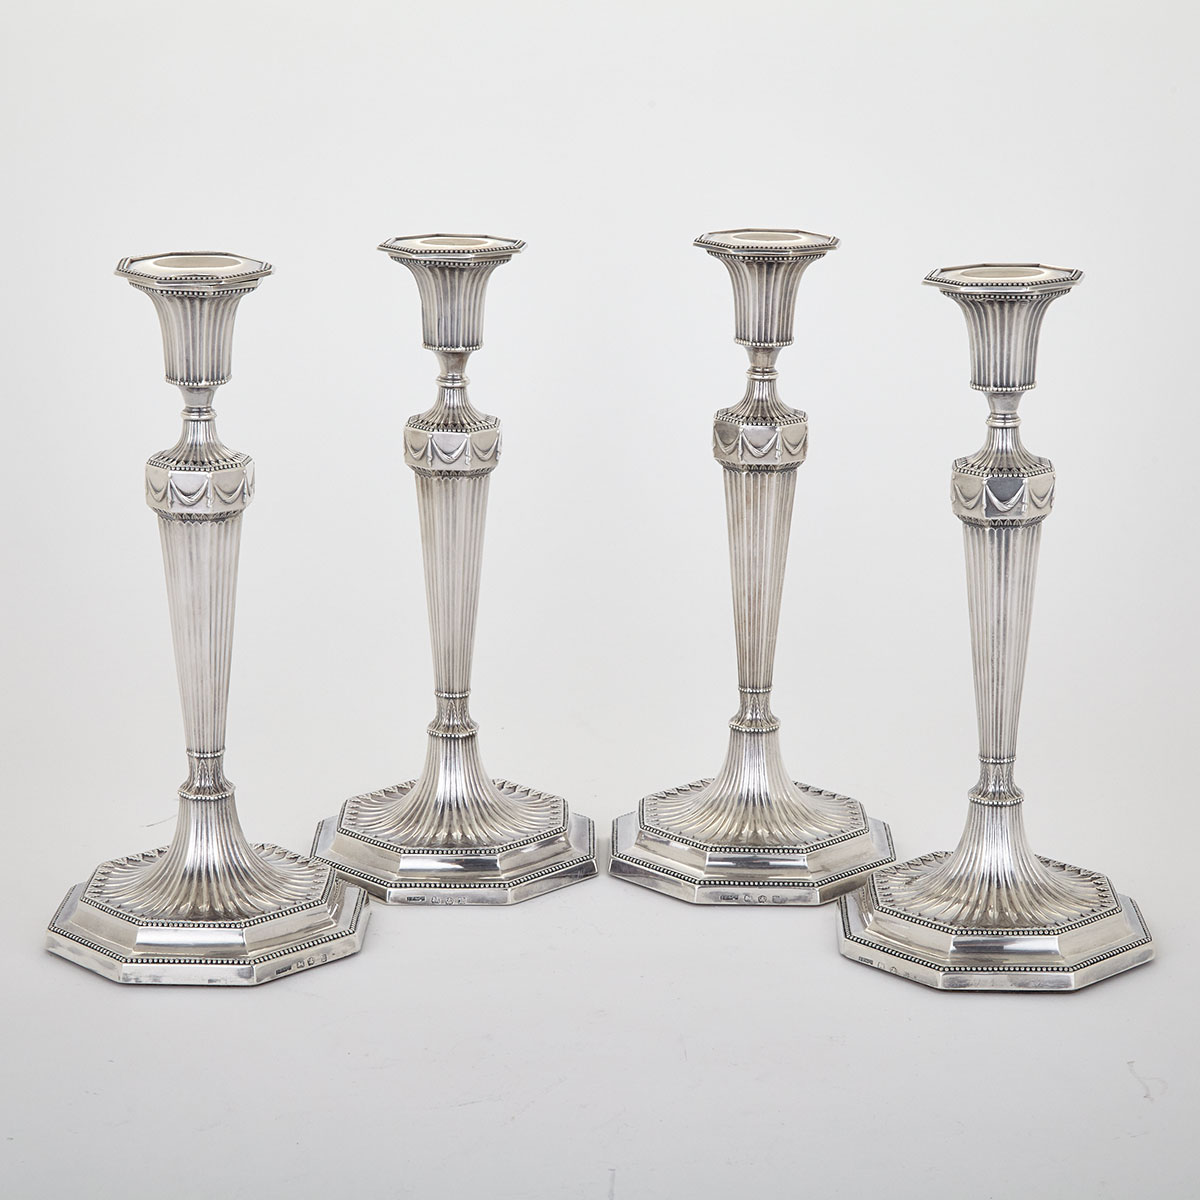 Set of Four George III Silver Table Candlesticks, John Parsons & Co., Sheffield, 1783